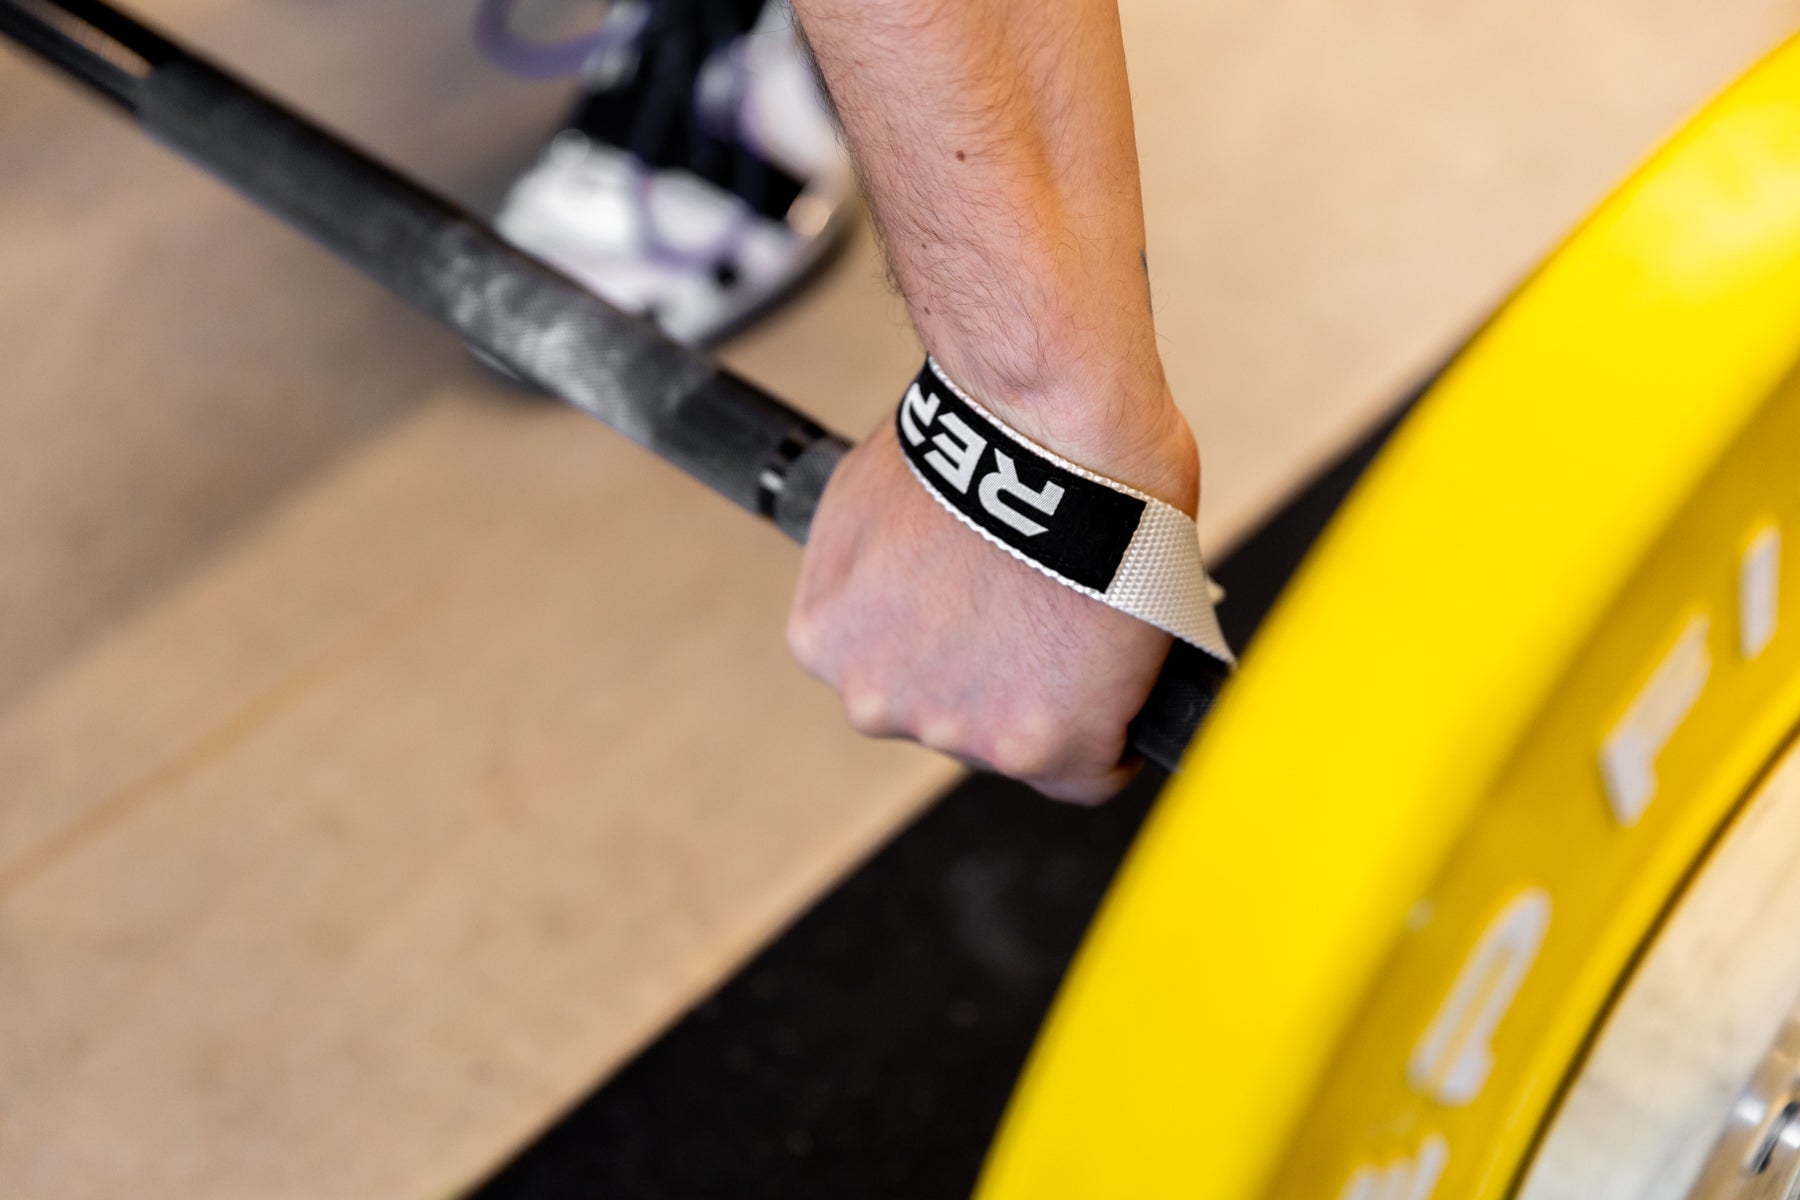 Close-up view of an athlete securing the left-sided white REP Olympic Lifting Strap to a loaded barbell.